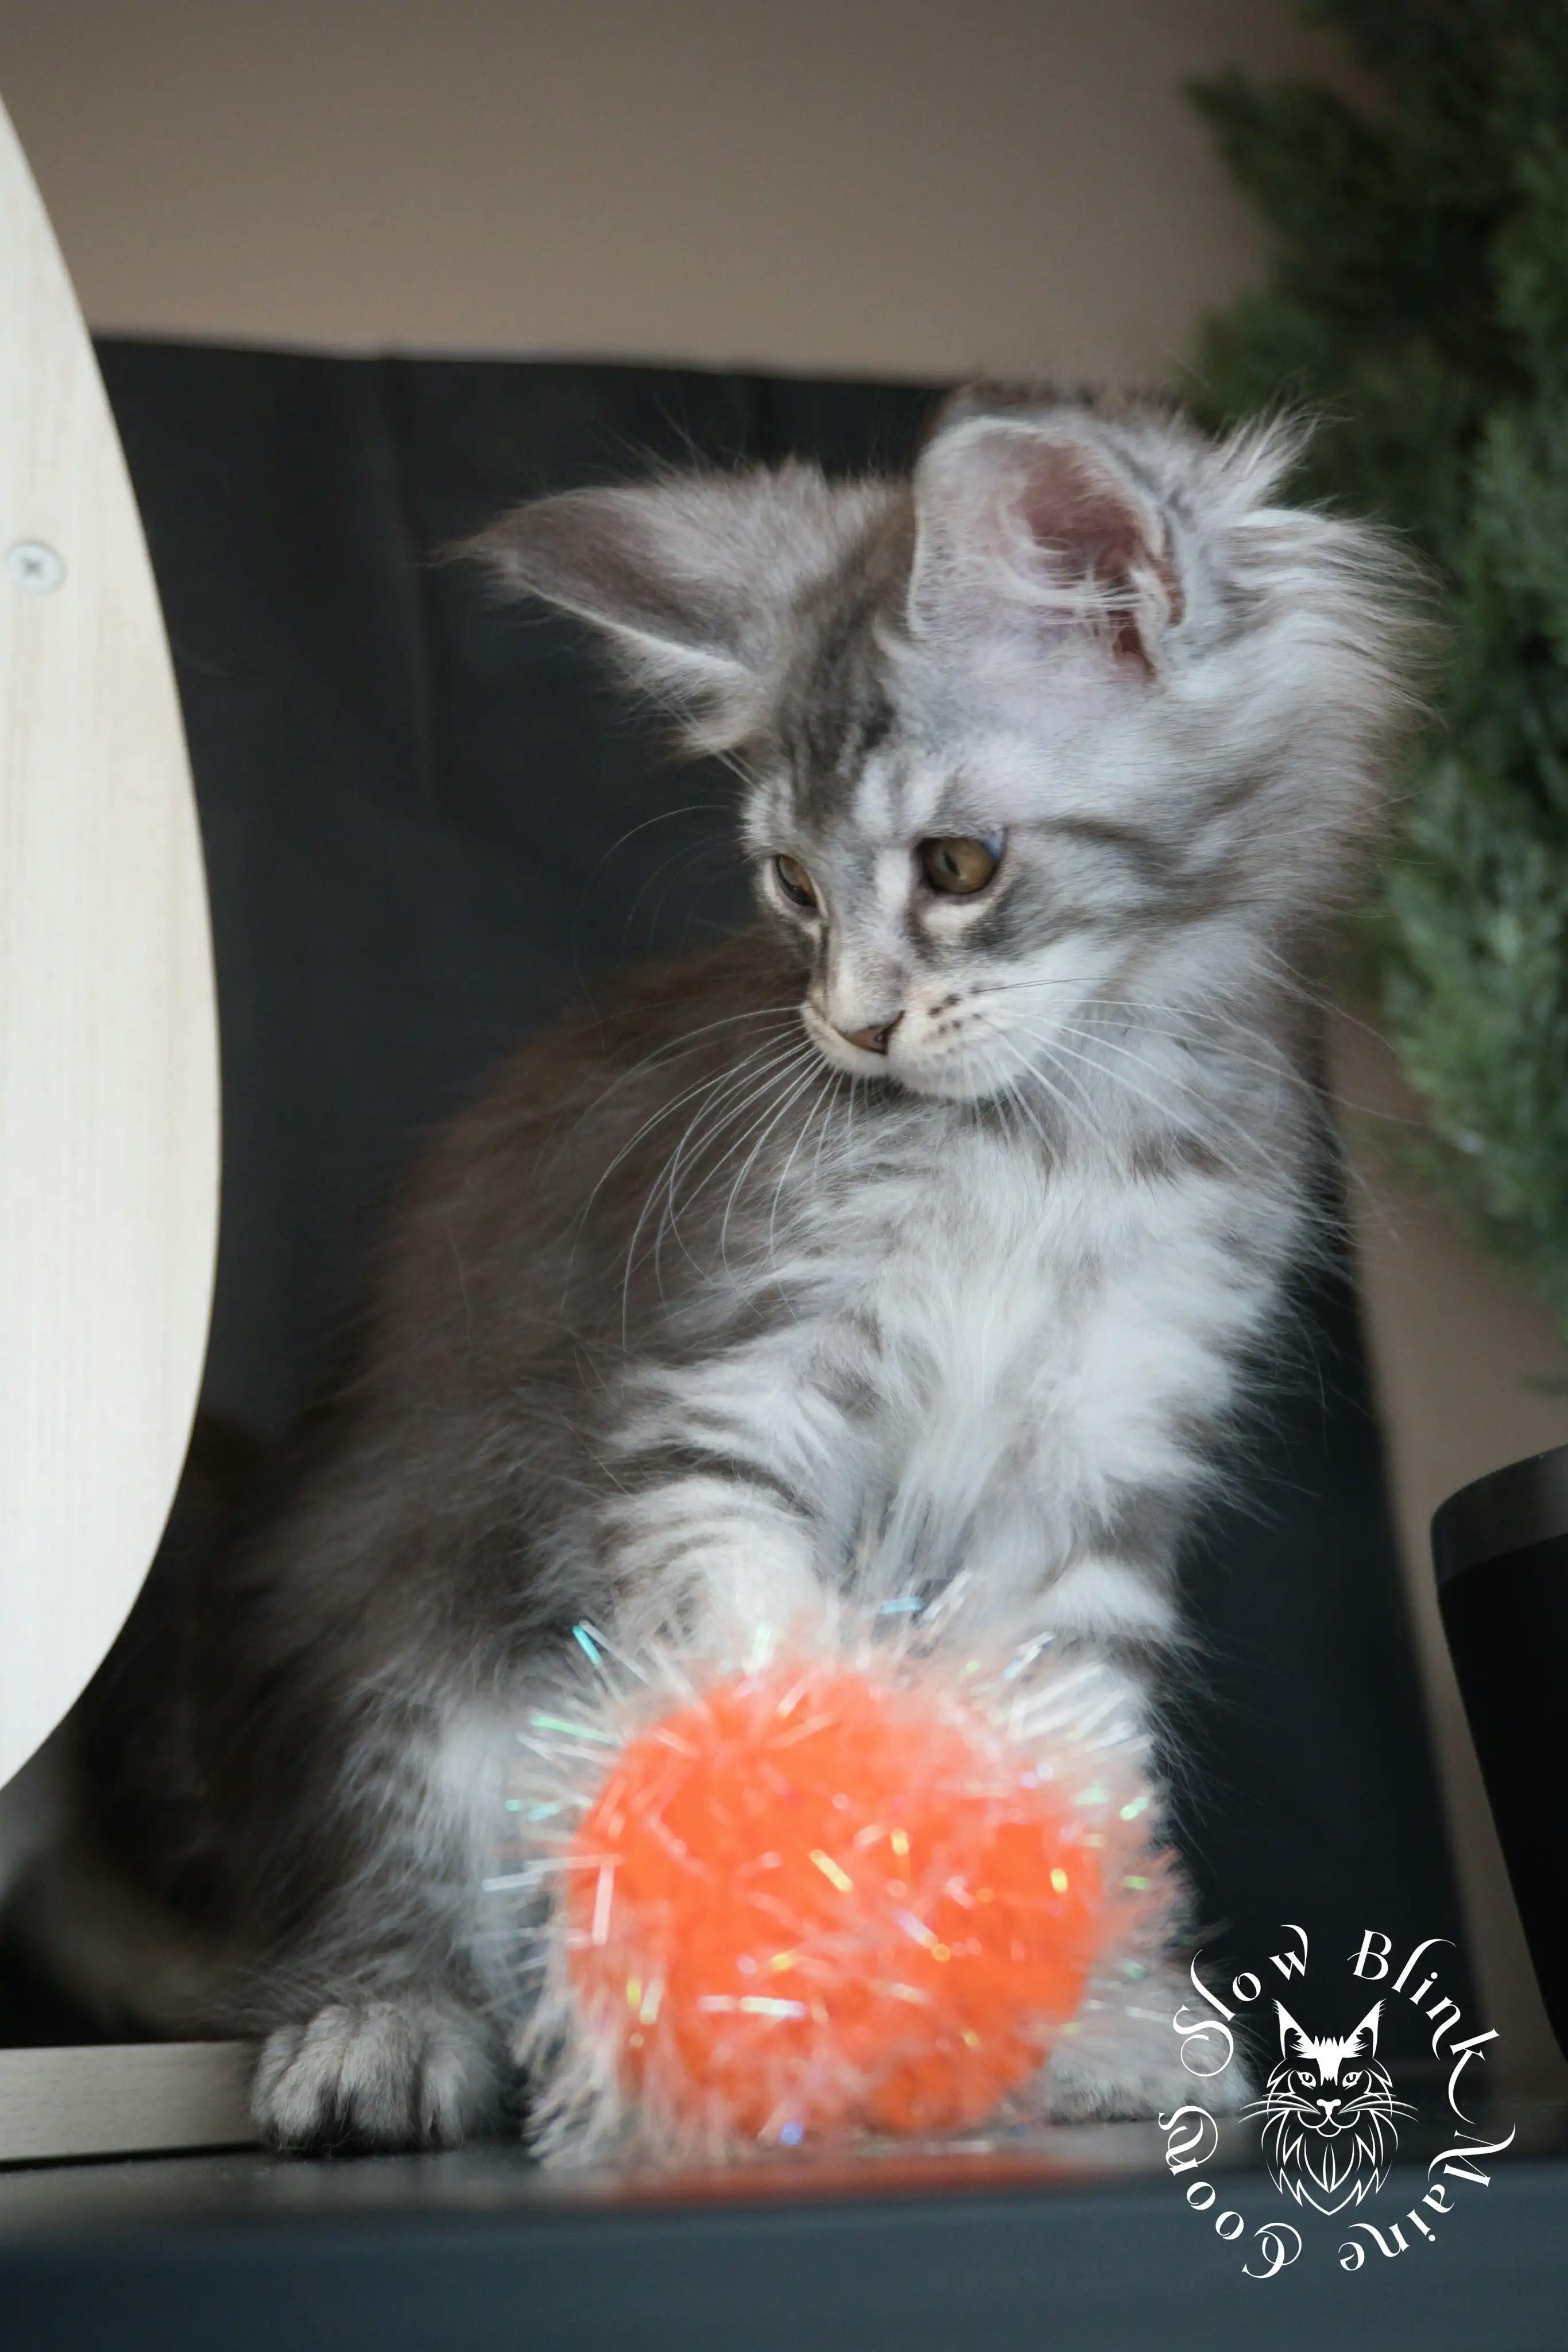 Blue Silver Tabby Maine Coon Kittens > blue silver tabby maine coon kitten | slowblinkmainecoons | 03